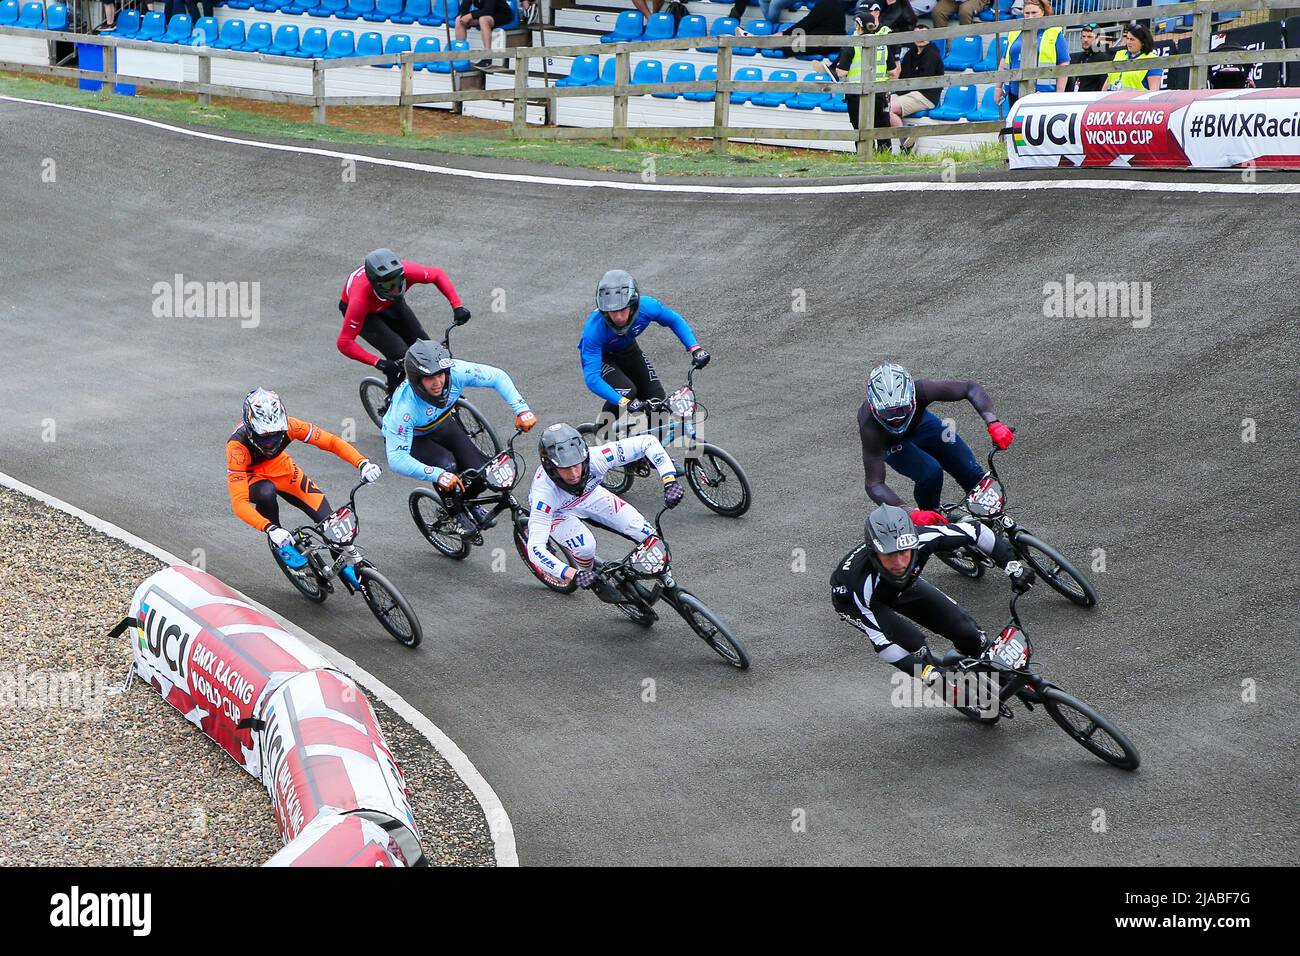 Glasgow, UK. 29th May, 2022. On the second and final day of the UCI BMX Racing world Cup, an international field of male and female competitors race for the title. The event was a 'sell out' and made more pleasurable by the warm sunny weather. Credit: Findlay/Alamy Live News Stock Photo